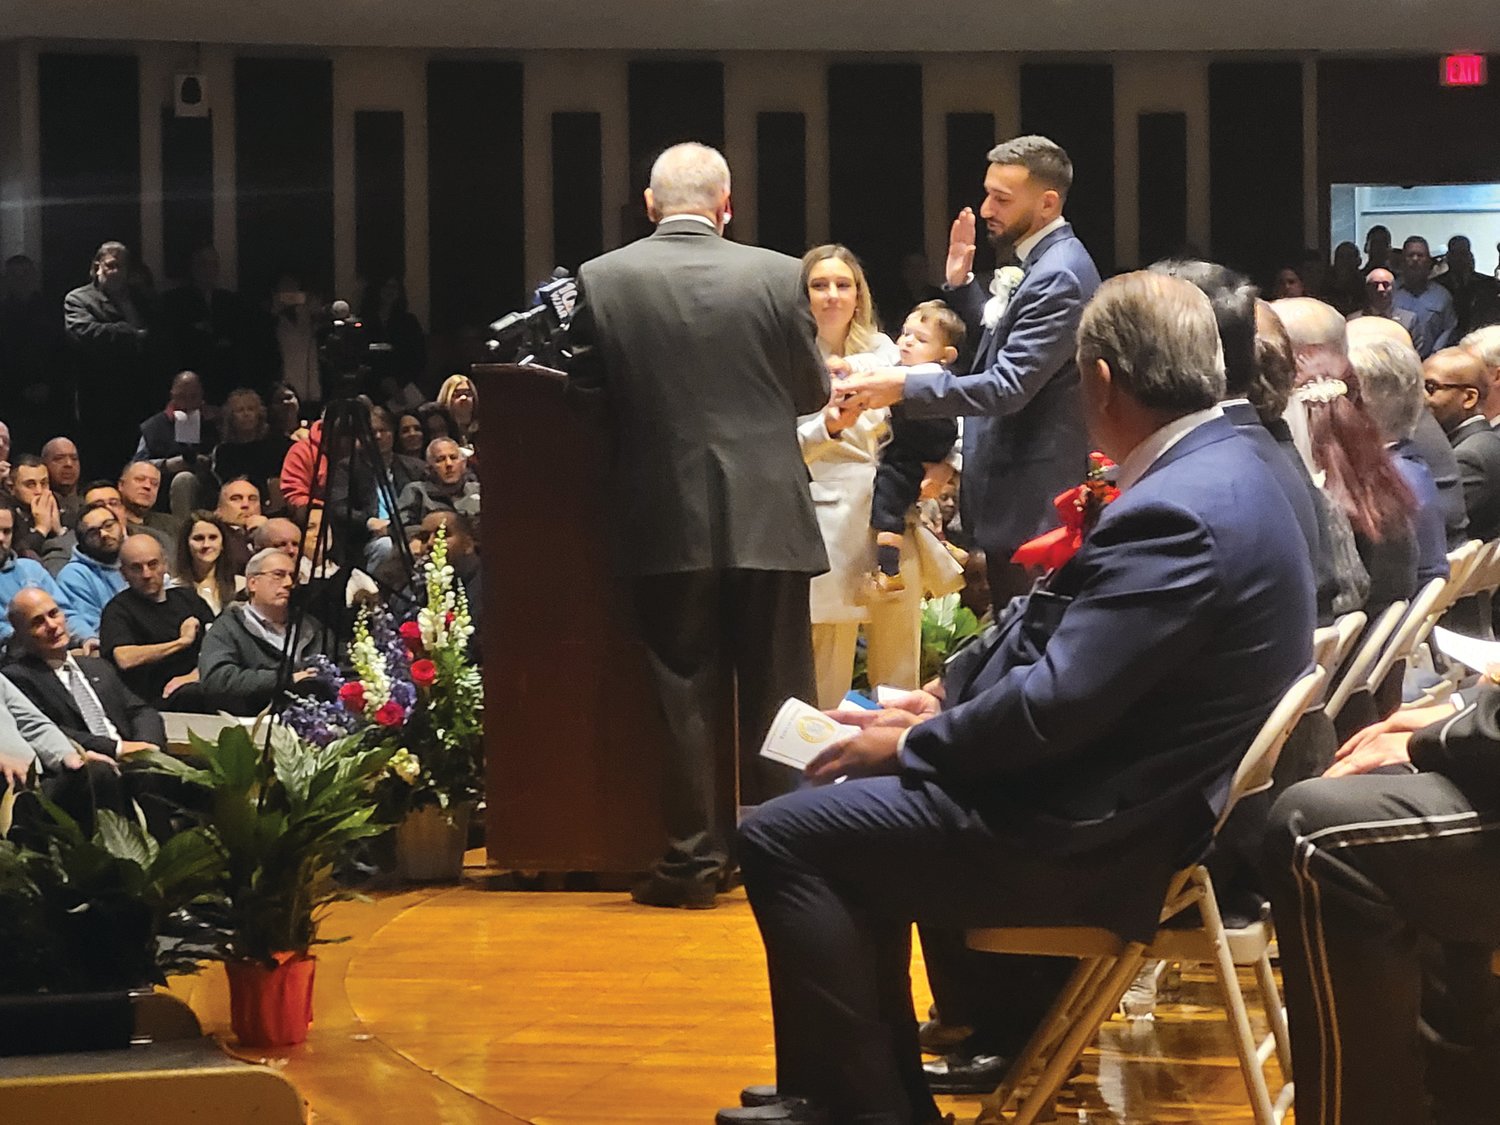 NEW MAYOR: Joseph Polisena Jr. took the oath of office on the evening of Monday, Jan. 9, becoming Johnston’s new mayor. His father, the now former mayor, swore-in the mayor-elect.